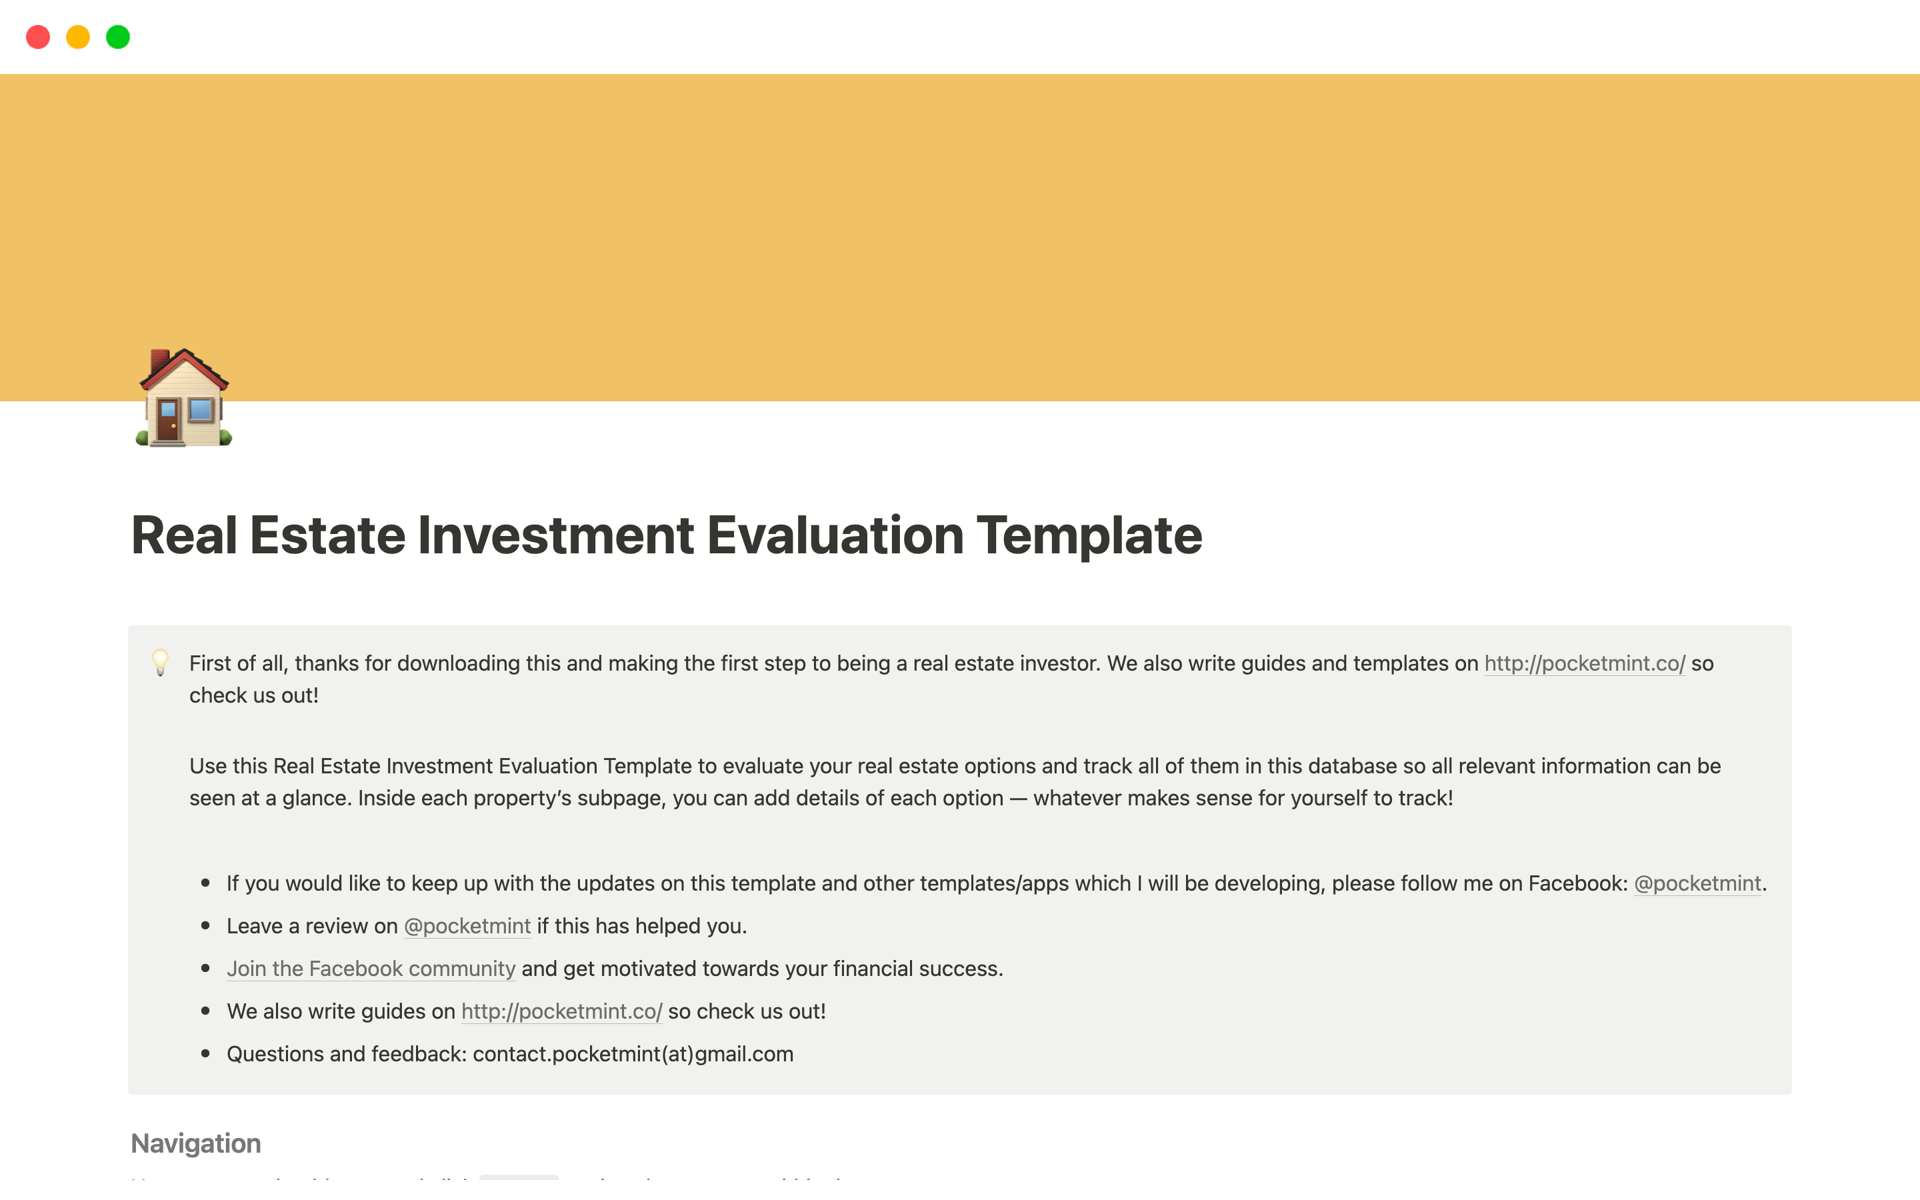 Get a tested real estate evaluation checklist, and organise your pipeline and real estate